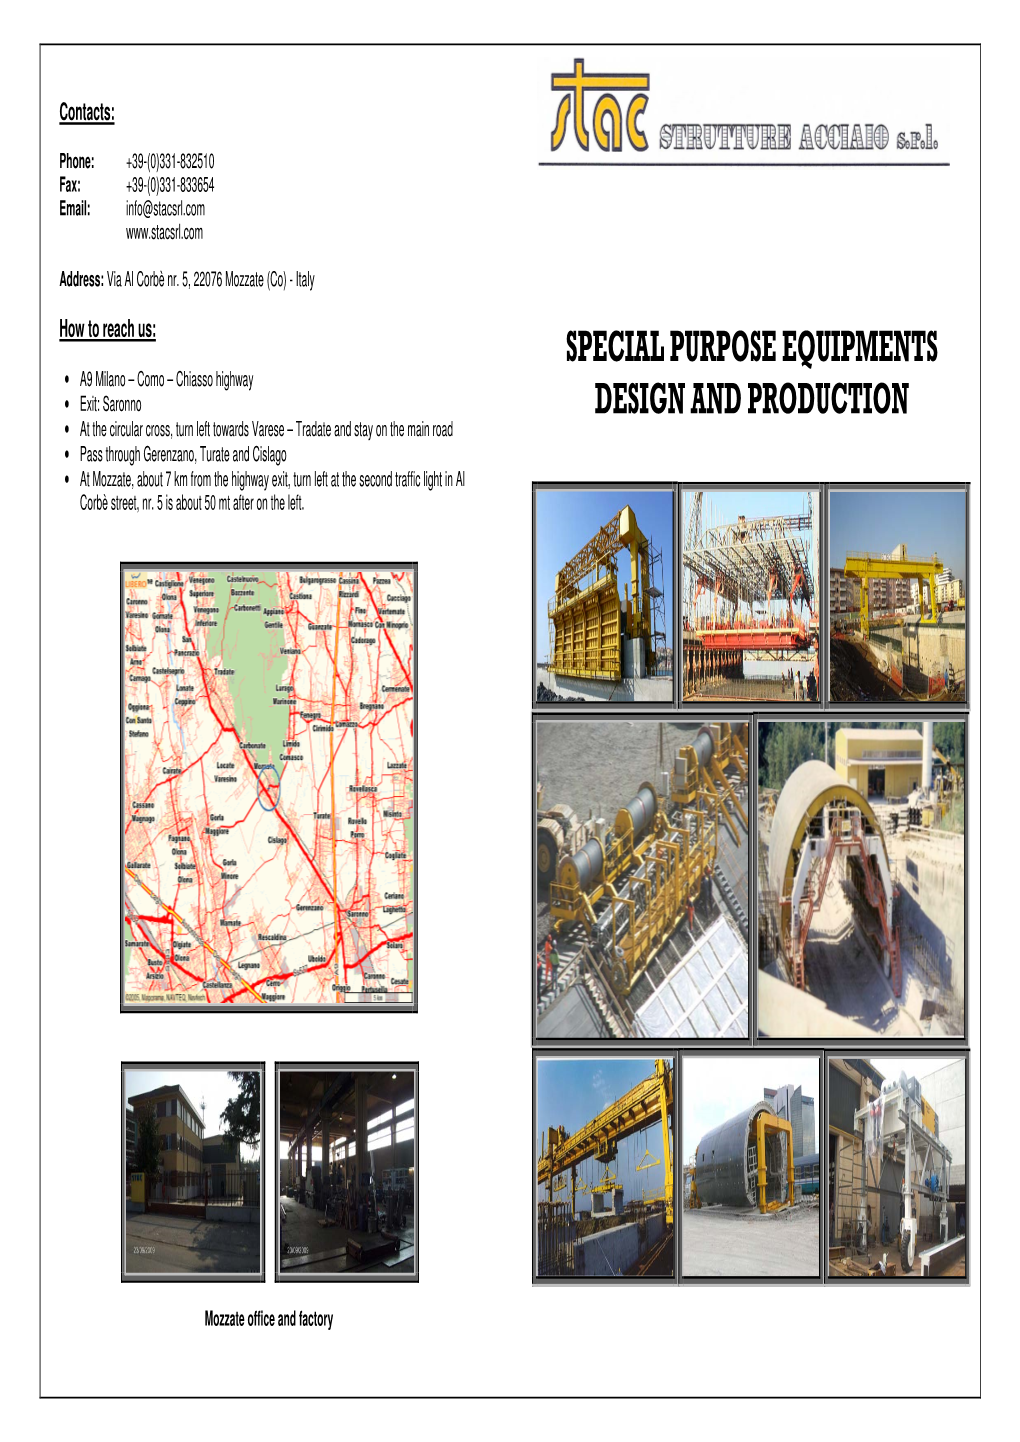 Special Purpose Equipments Design and Production